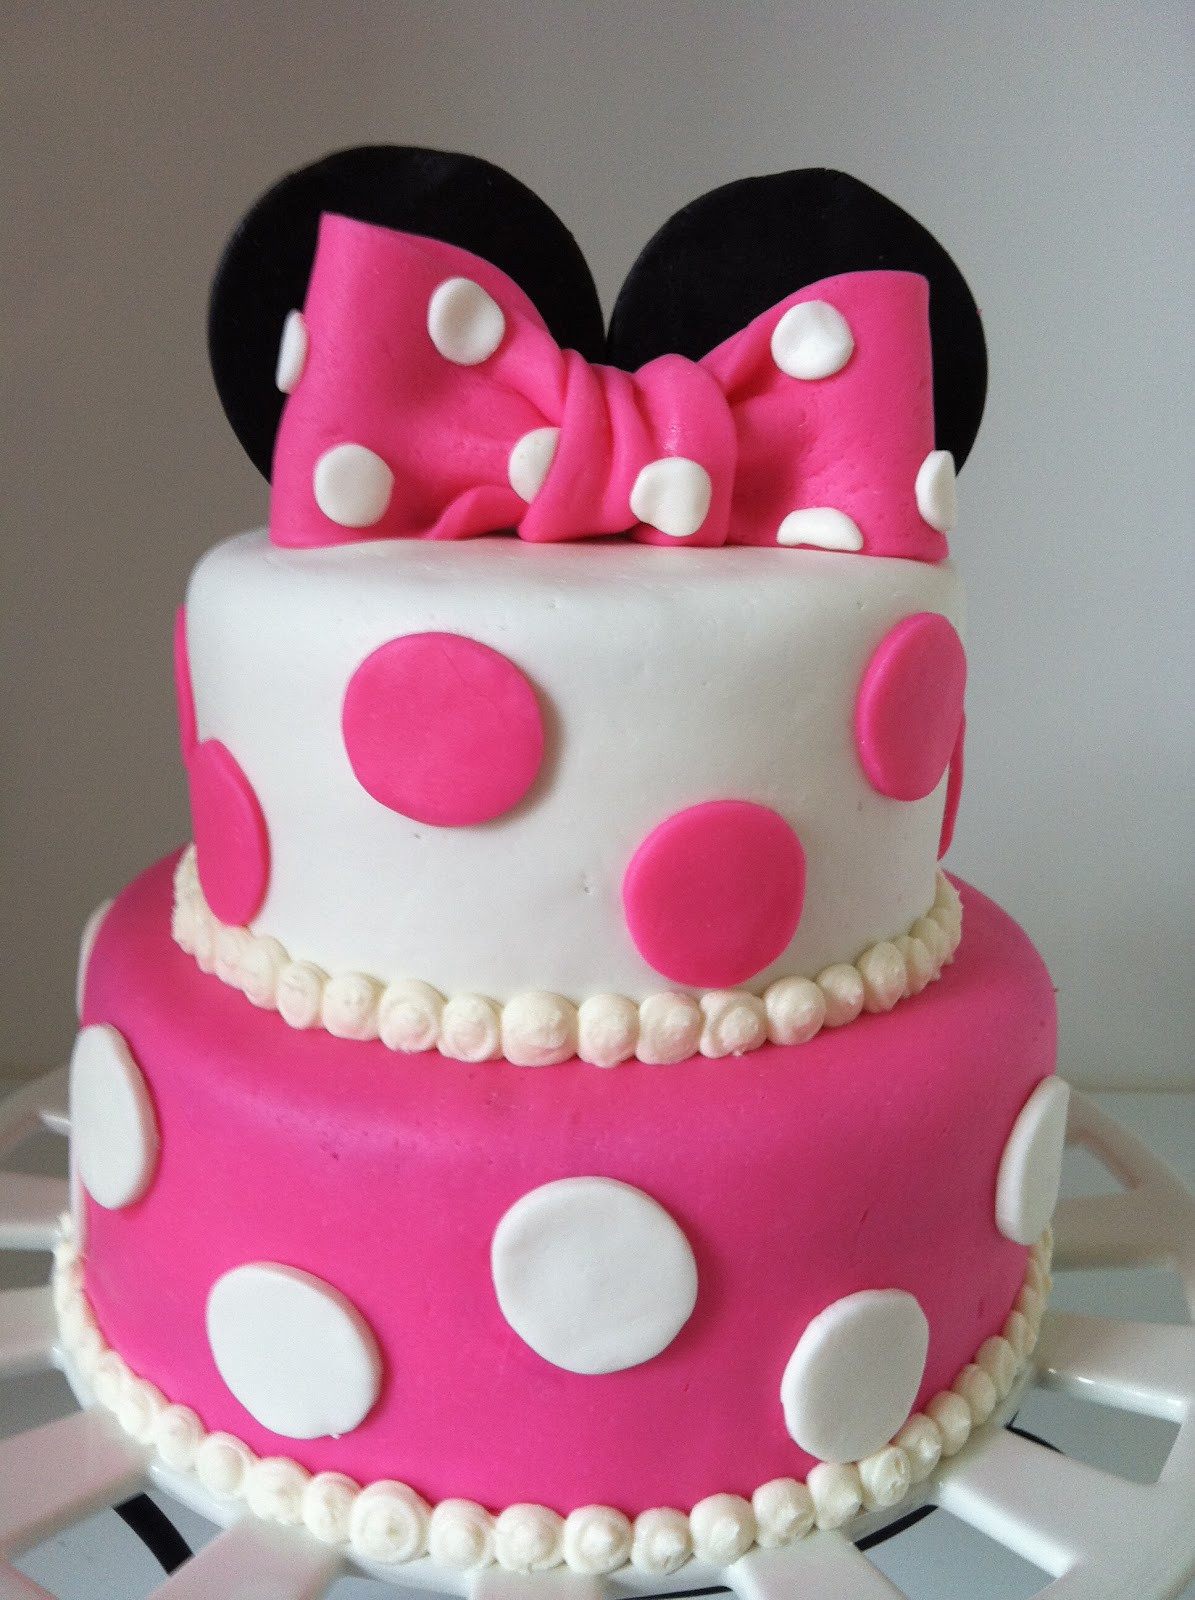 Baby Girl Birthday Cake
 Birthday Cakes for Girls Make Surprise with Adorable Design